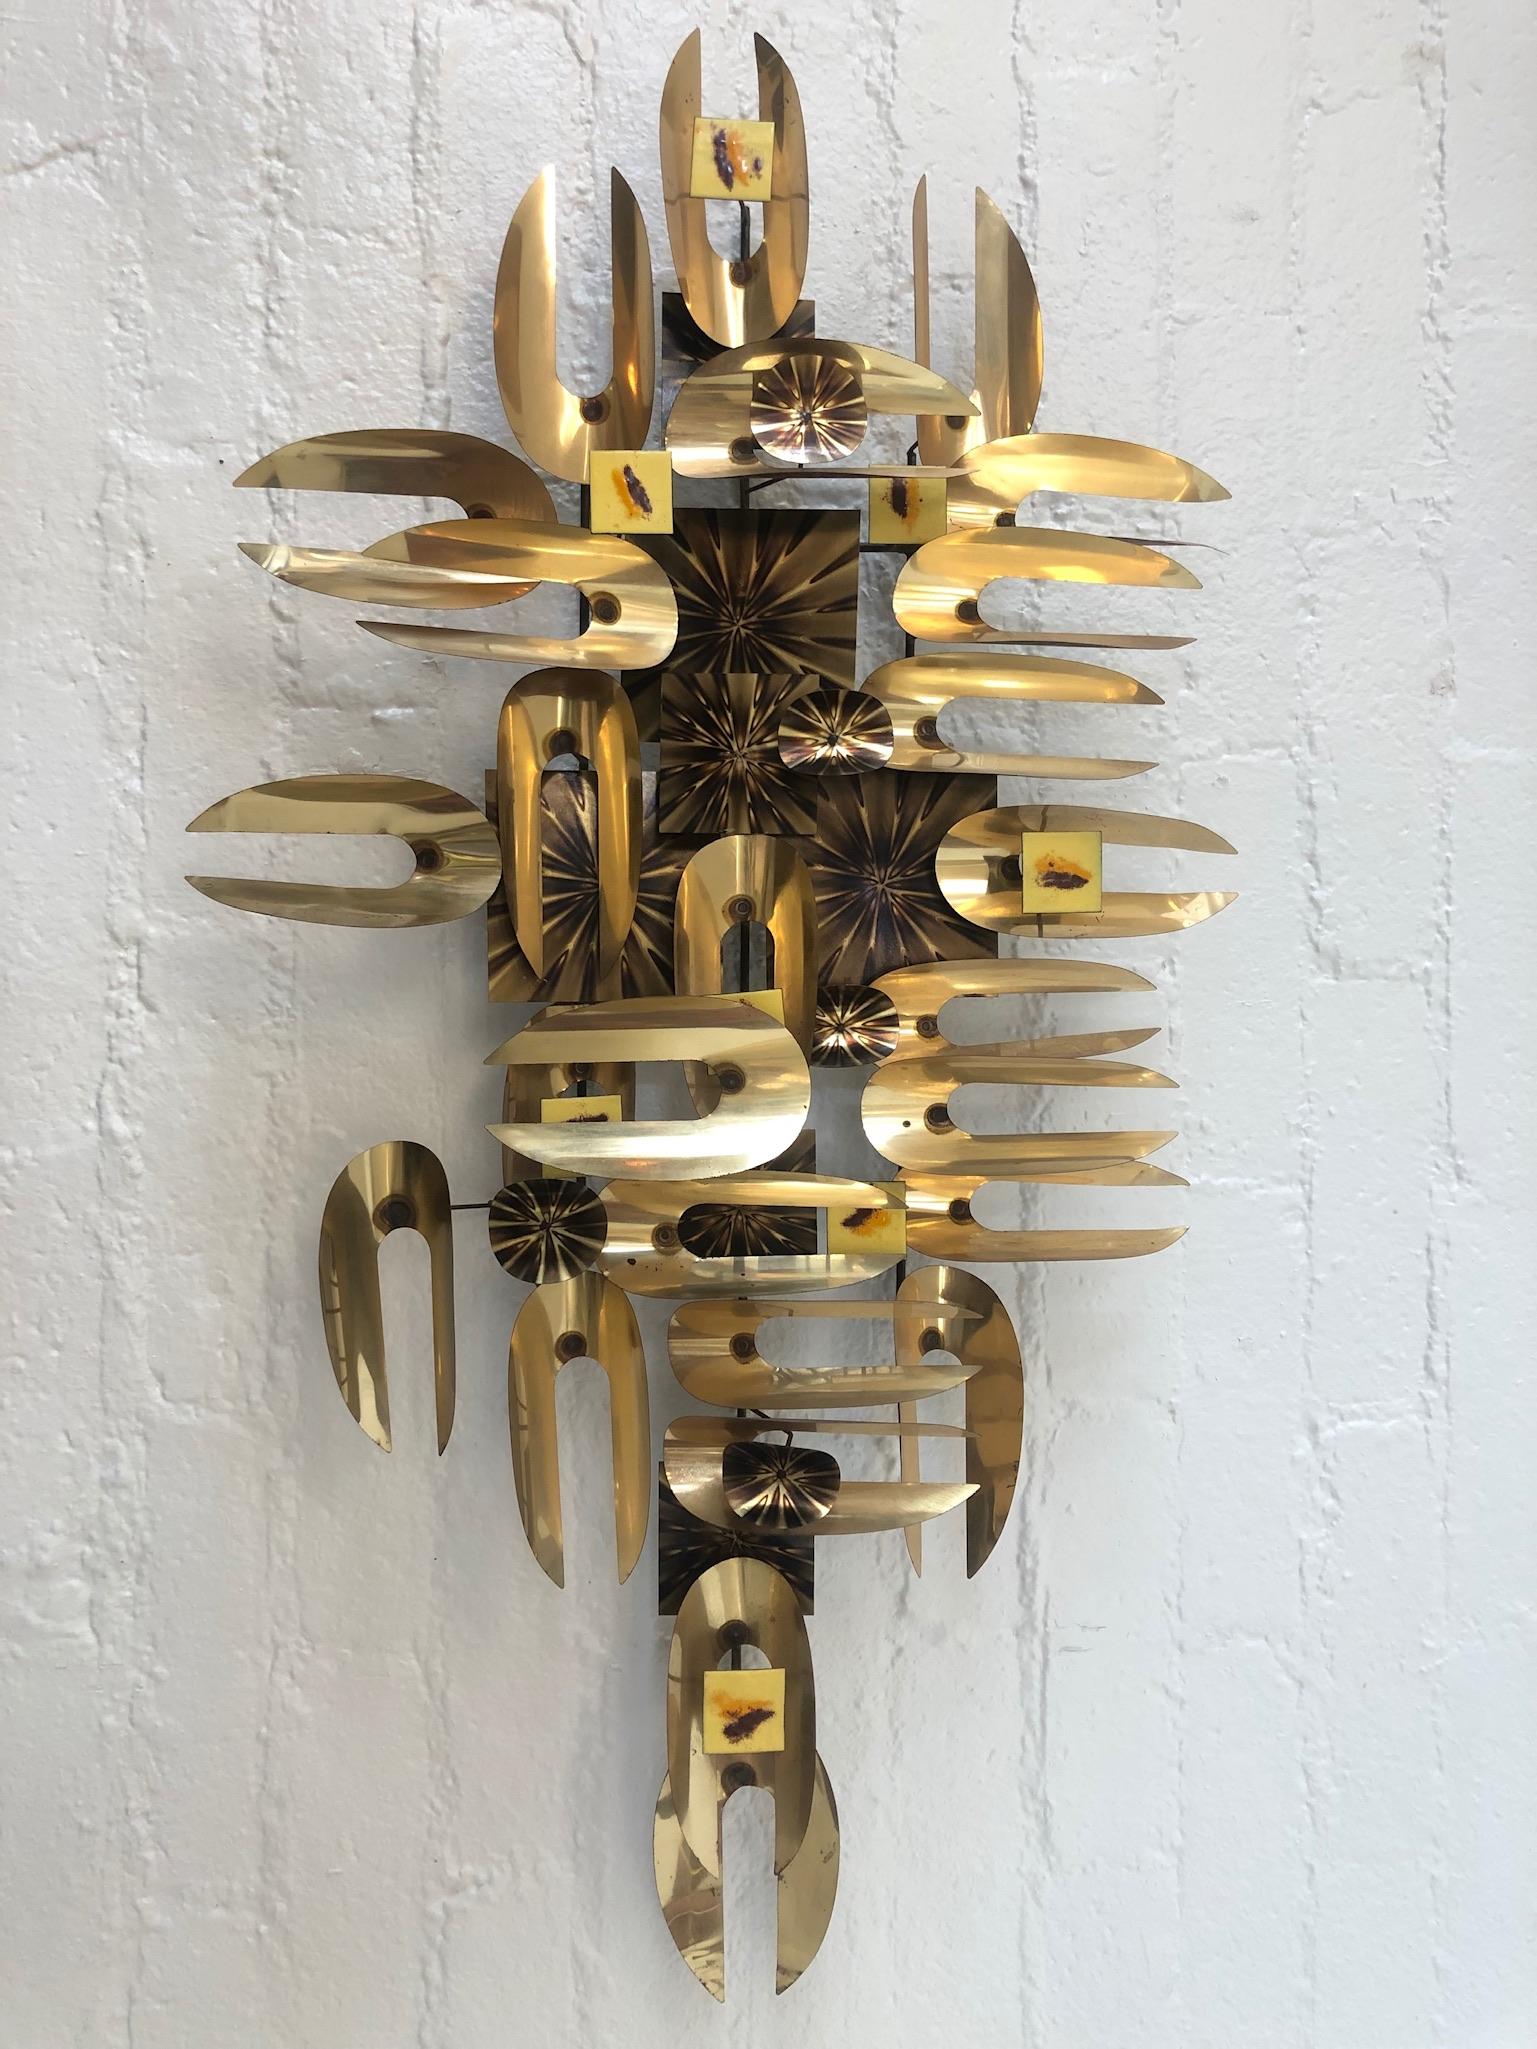 Late 20th Century Brass and Enamel Brutalist Wall Sculpture